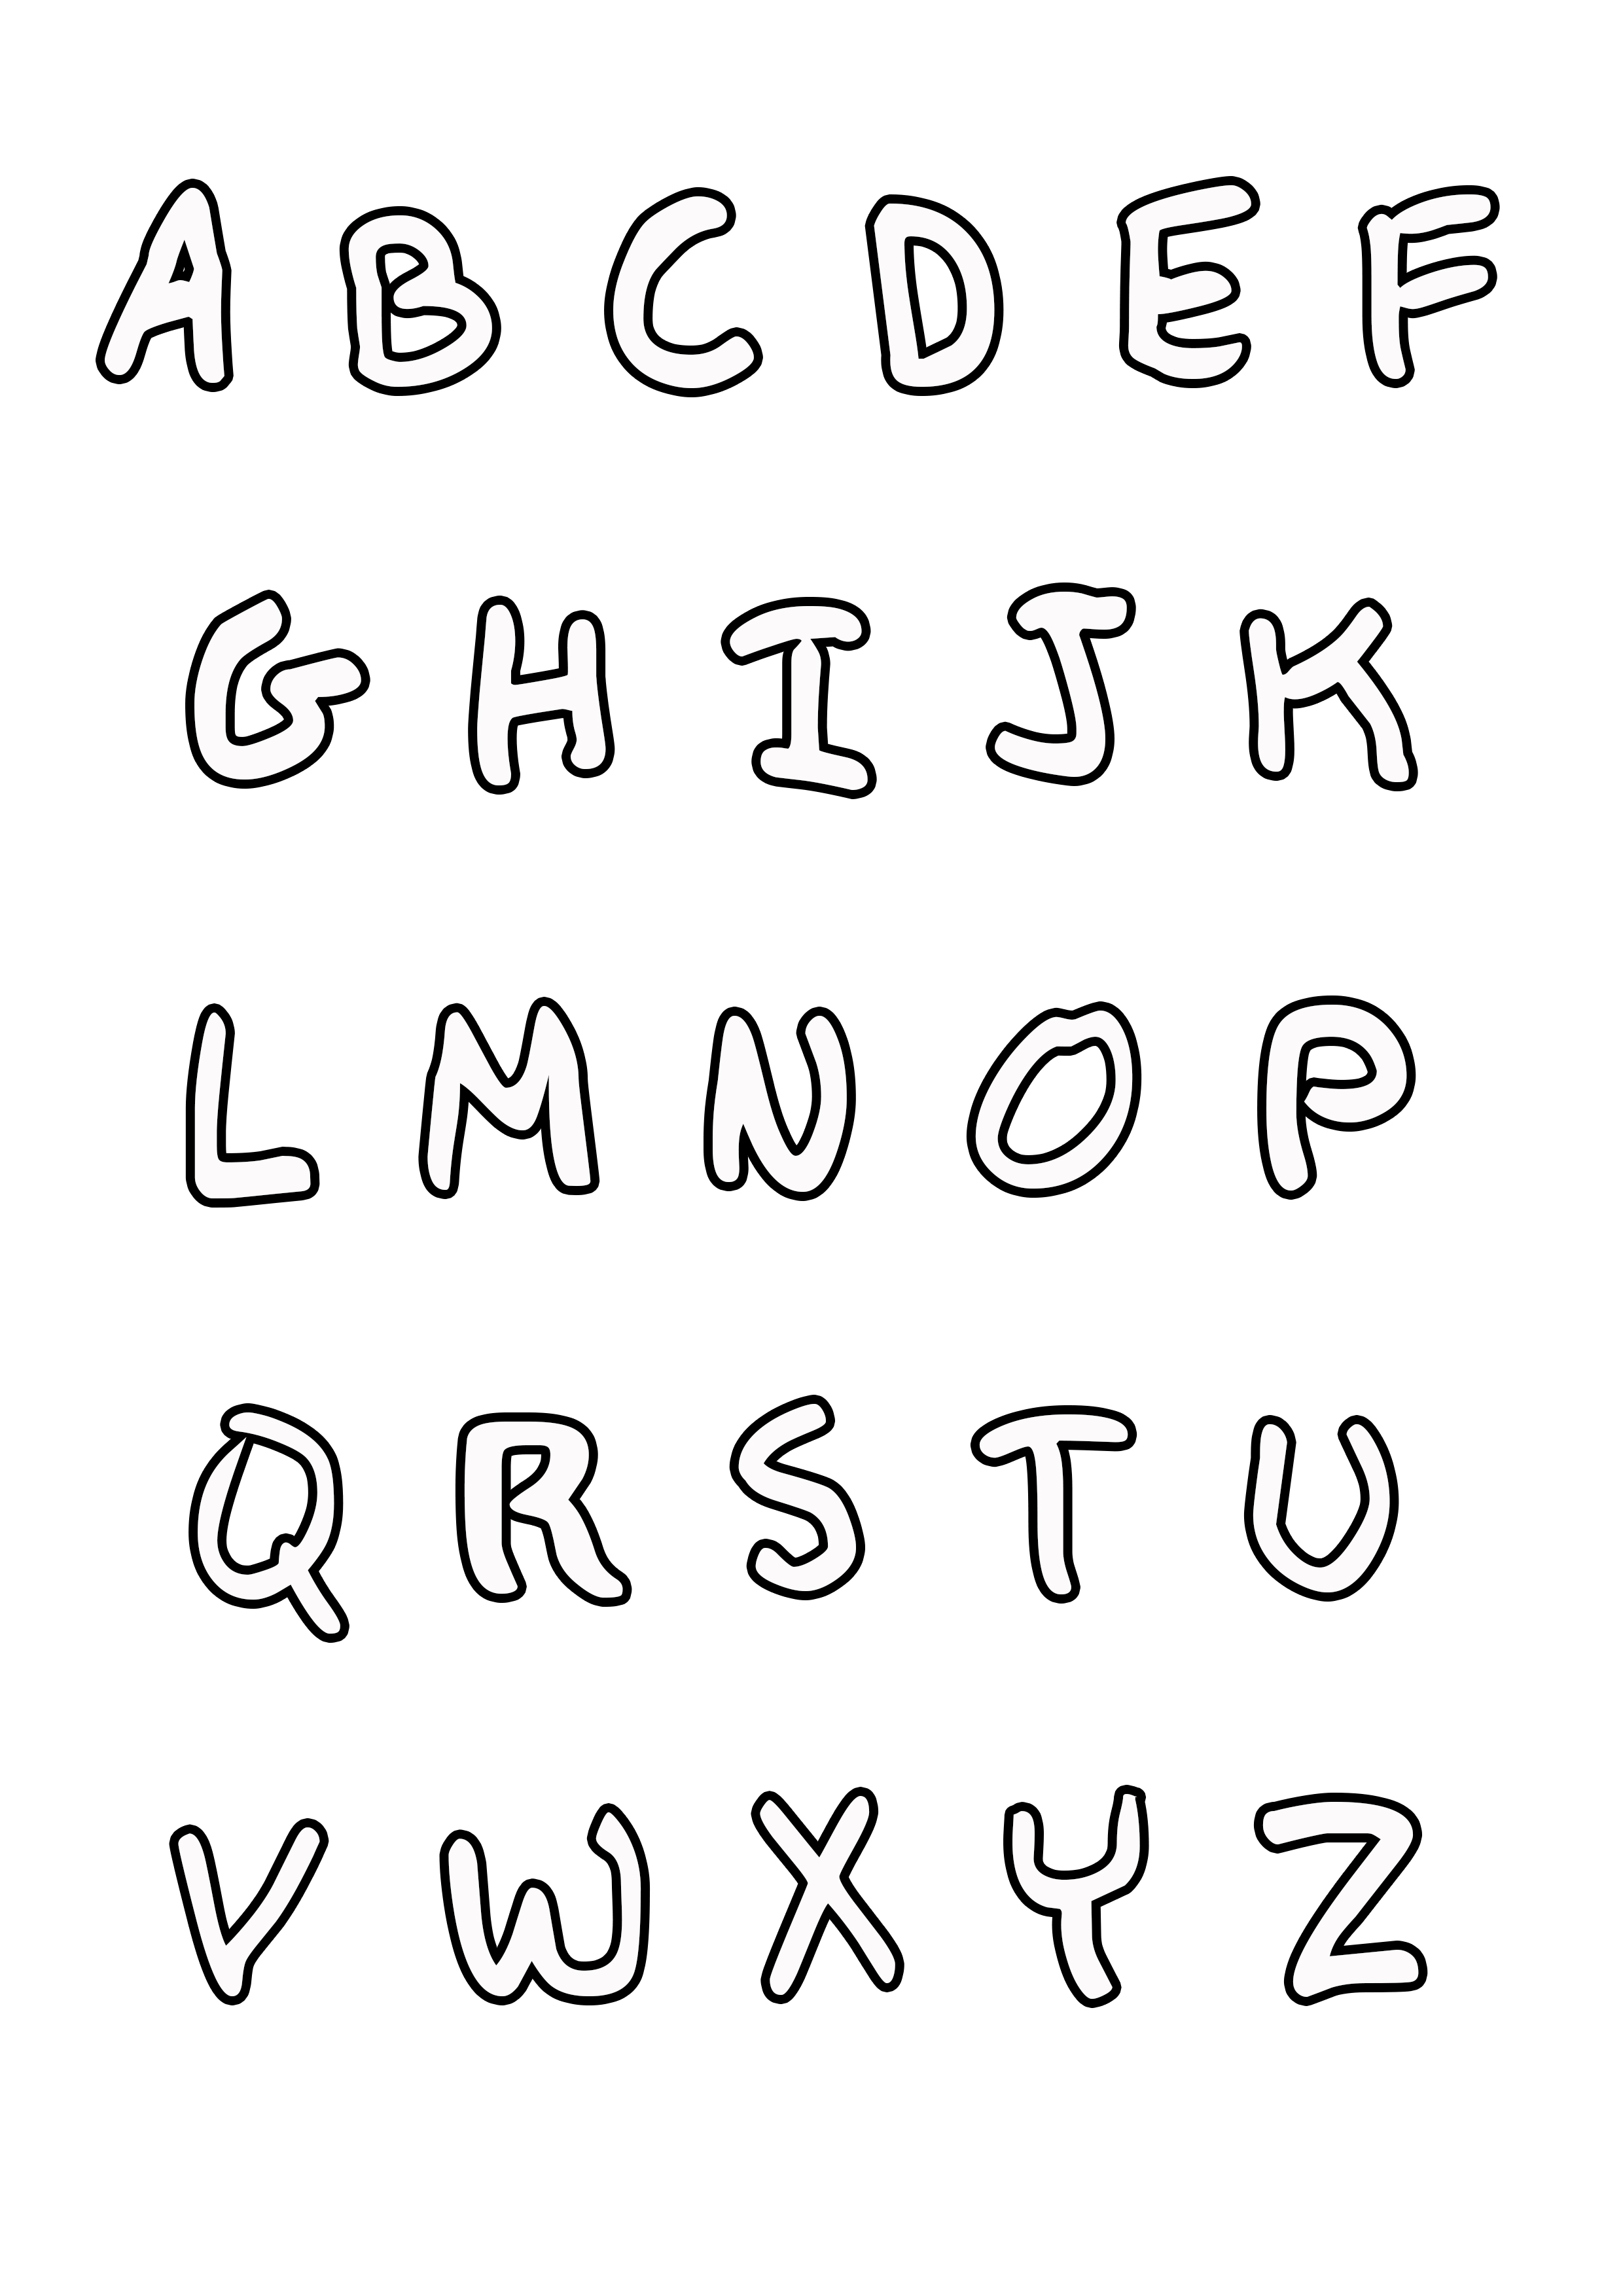 Tribal letters A to Z by withoutnickname on DeviantArt